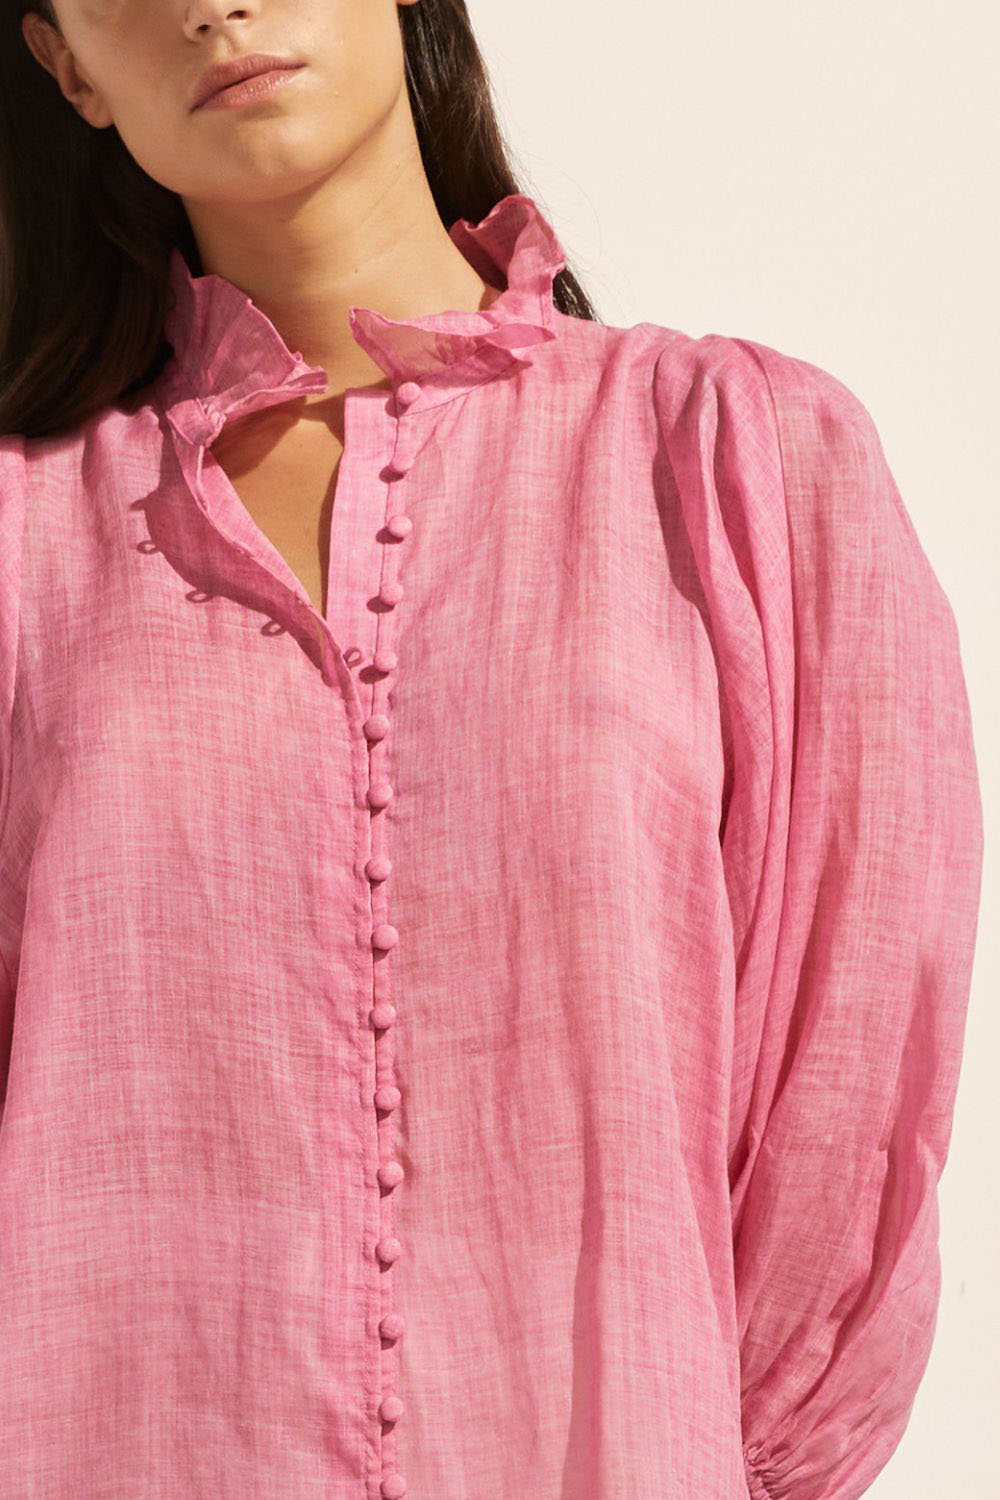 pink, covered buttons, voluminous sleeve, high neck, ruffle collar, mid length sleeve, elasticated cuff, top, close up image